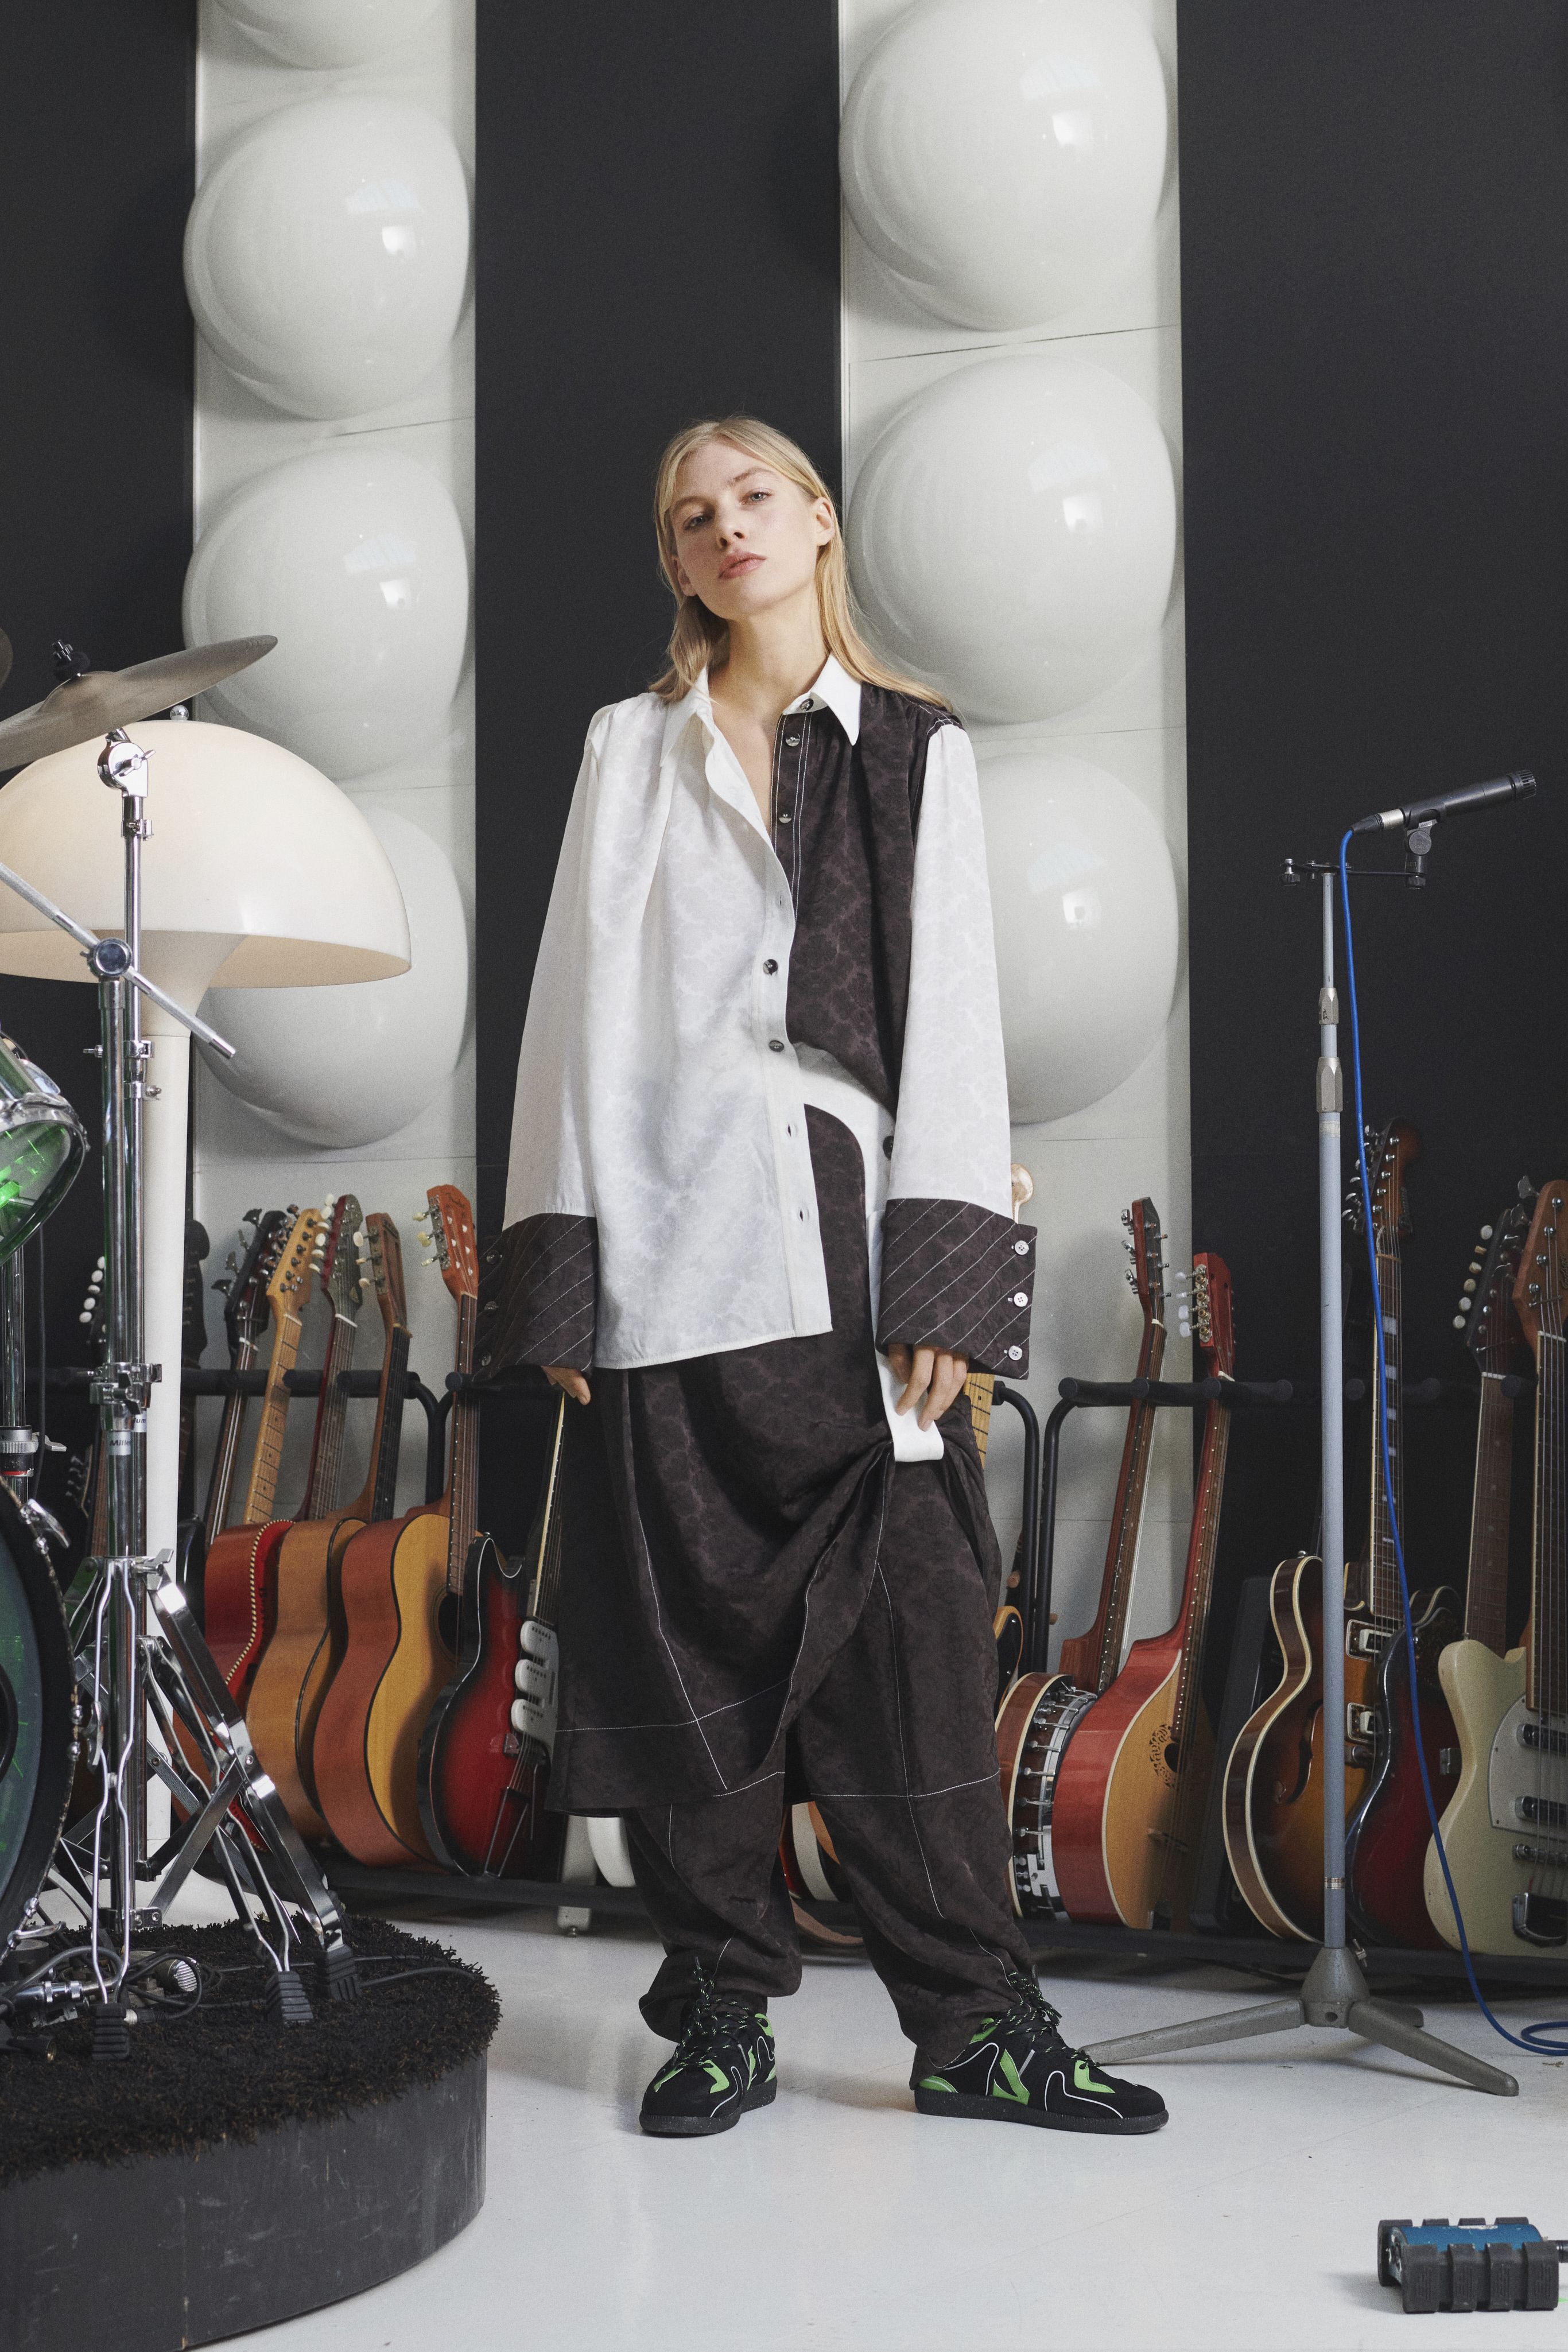 Music And Fashion Meet For A Joy-Filled Ganni Show In Copenhagen